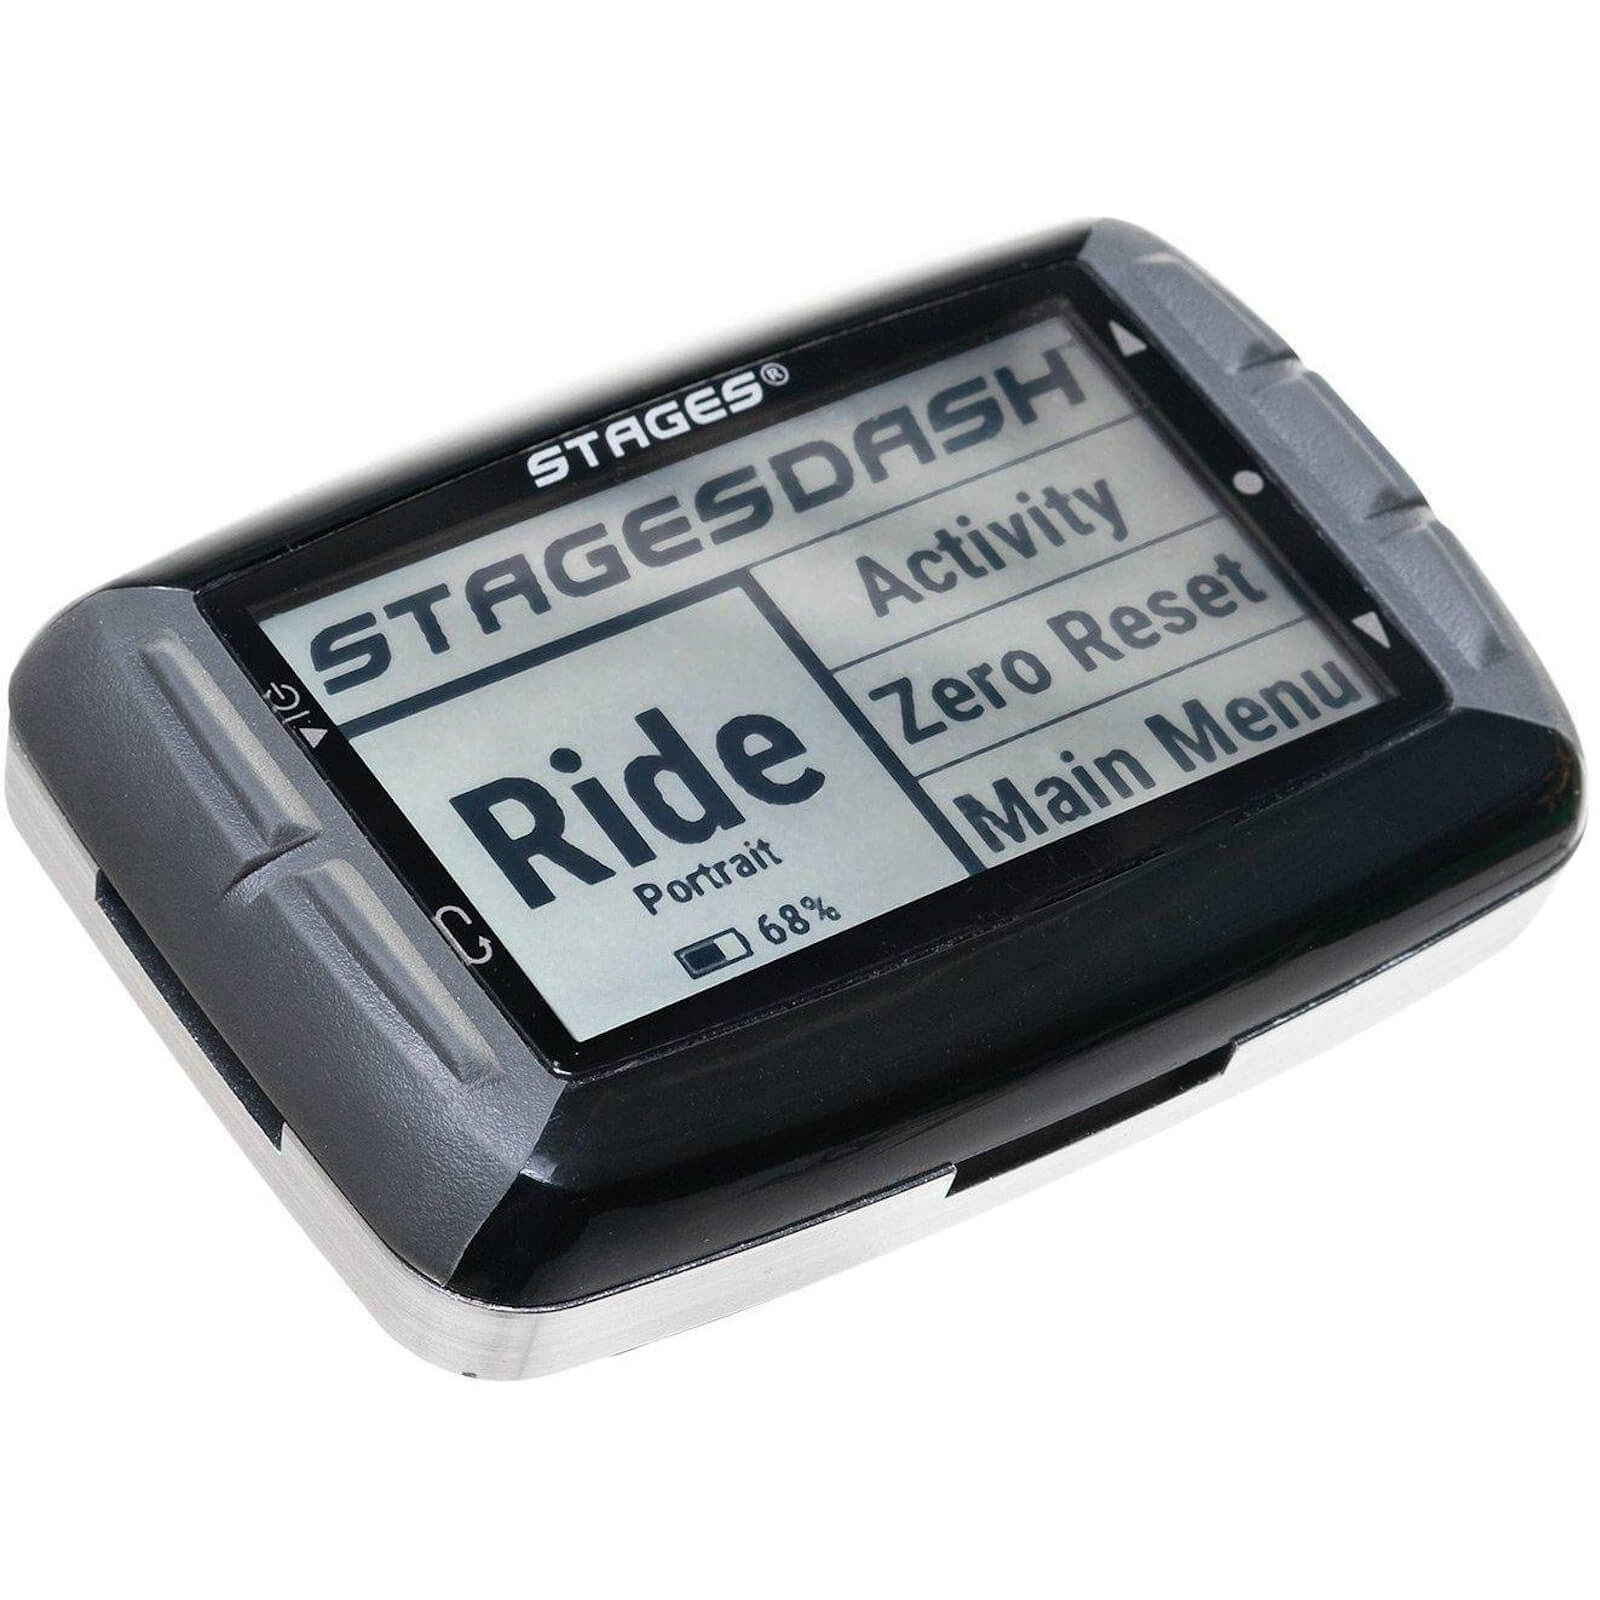 Stages Dash L10 GPS Cycle Computer